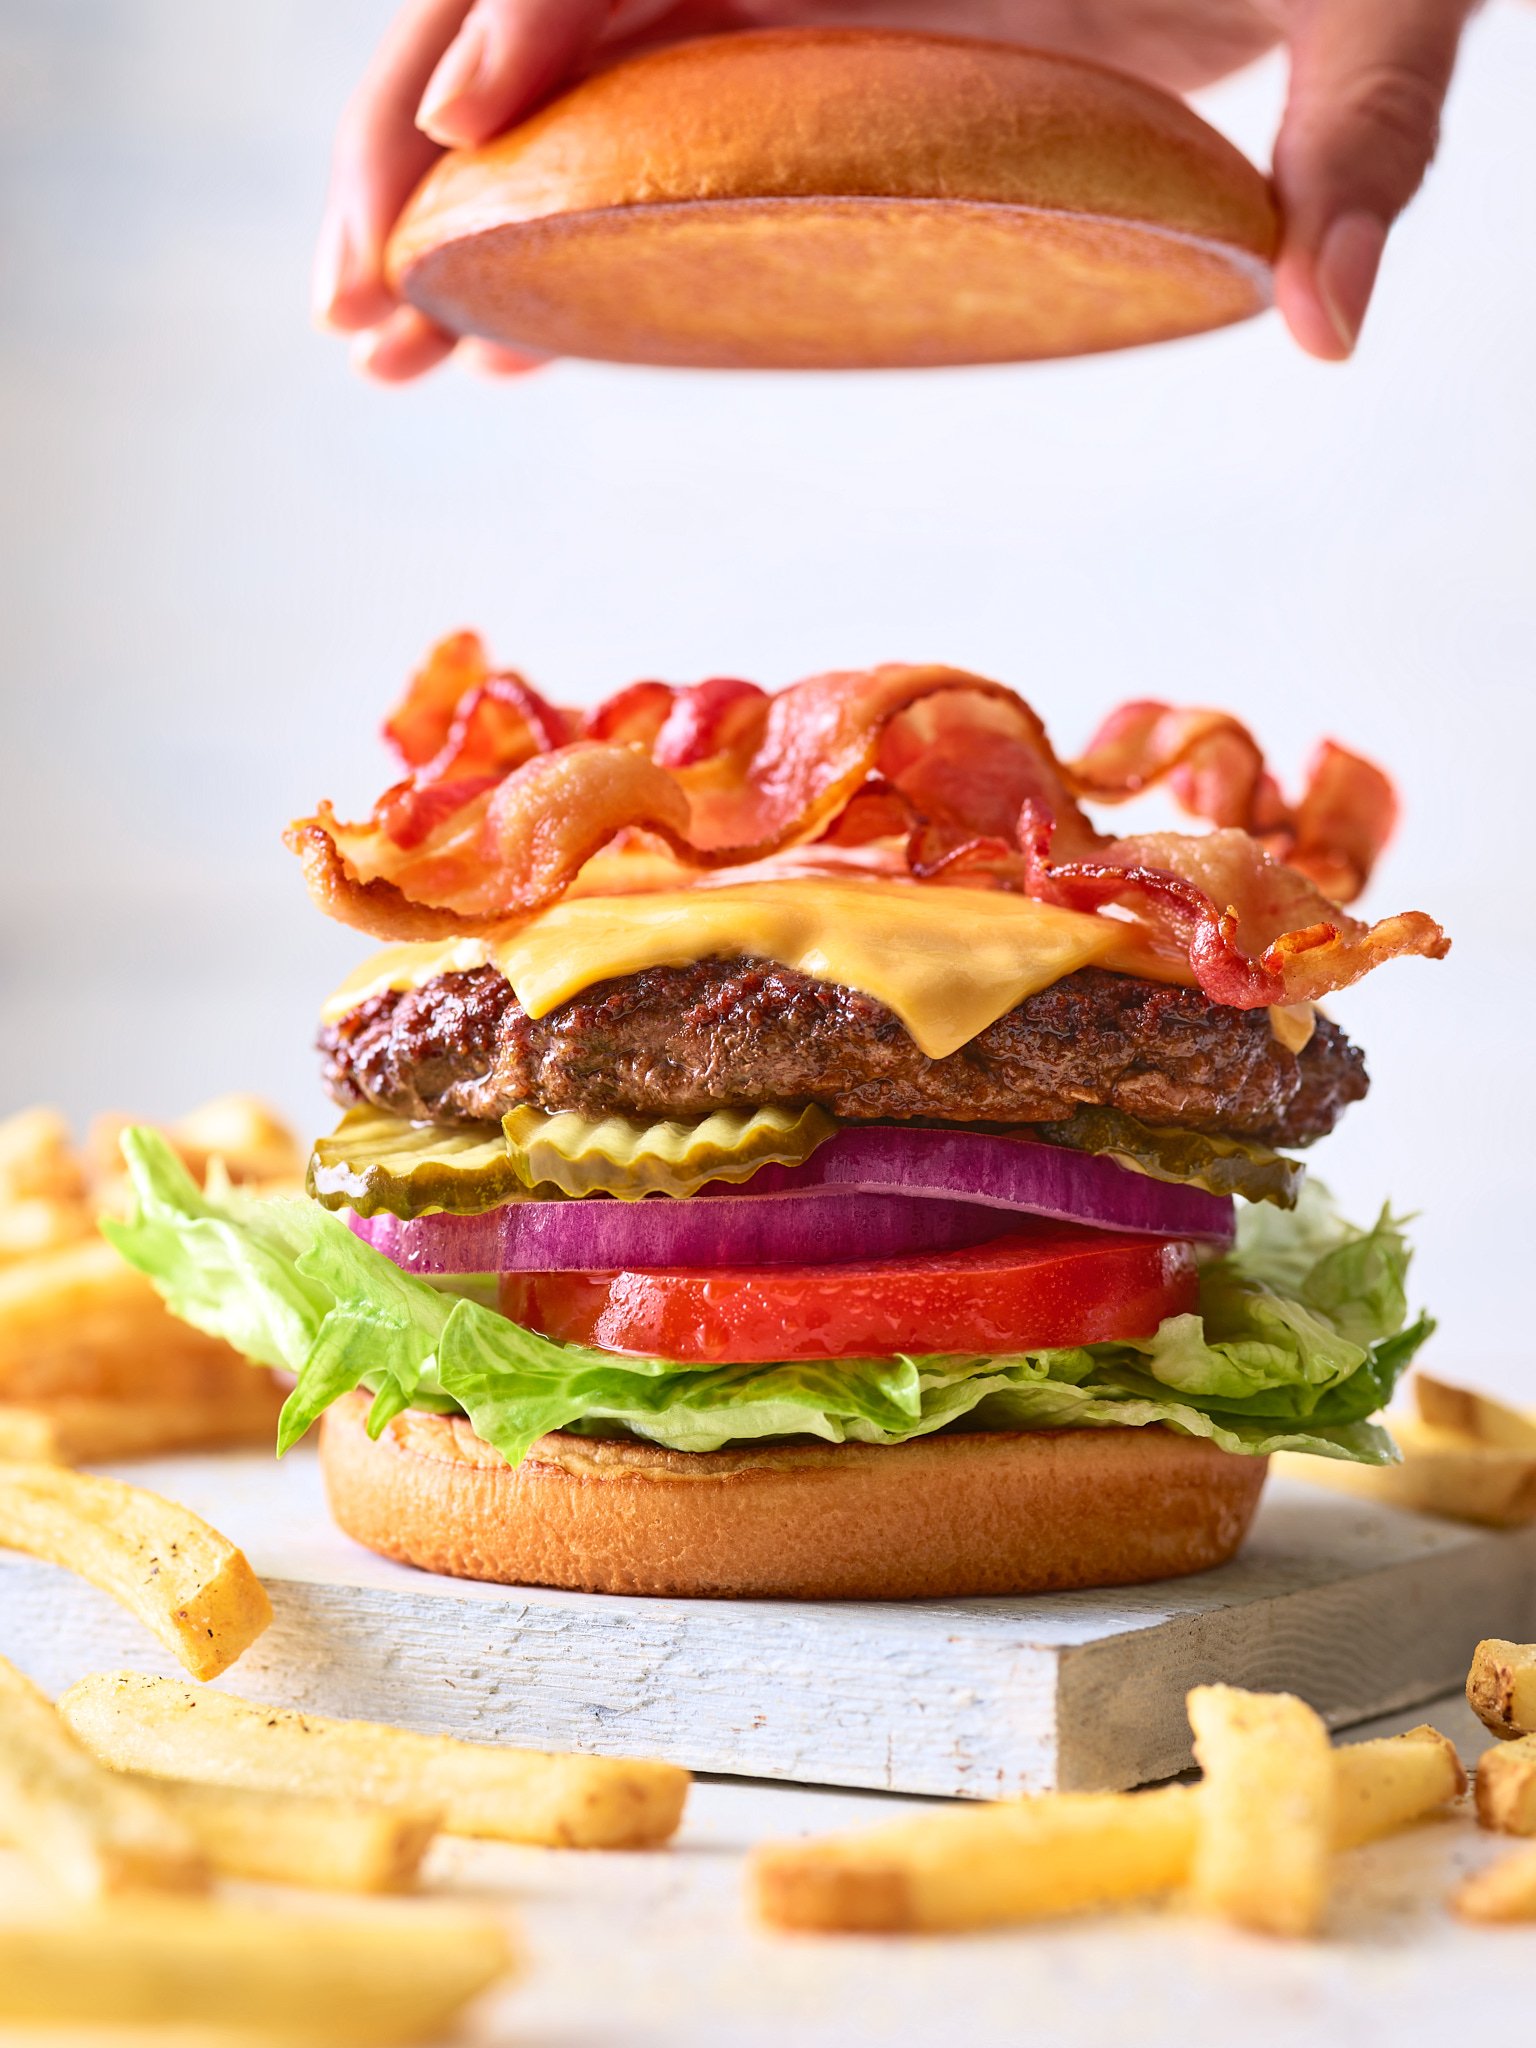 8-Classic-Bacon-Cheeseburger-and-Fries-Hands_0251-030220-R2-V1.jpg